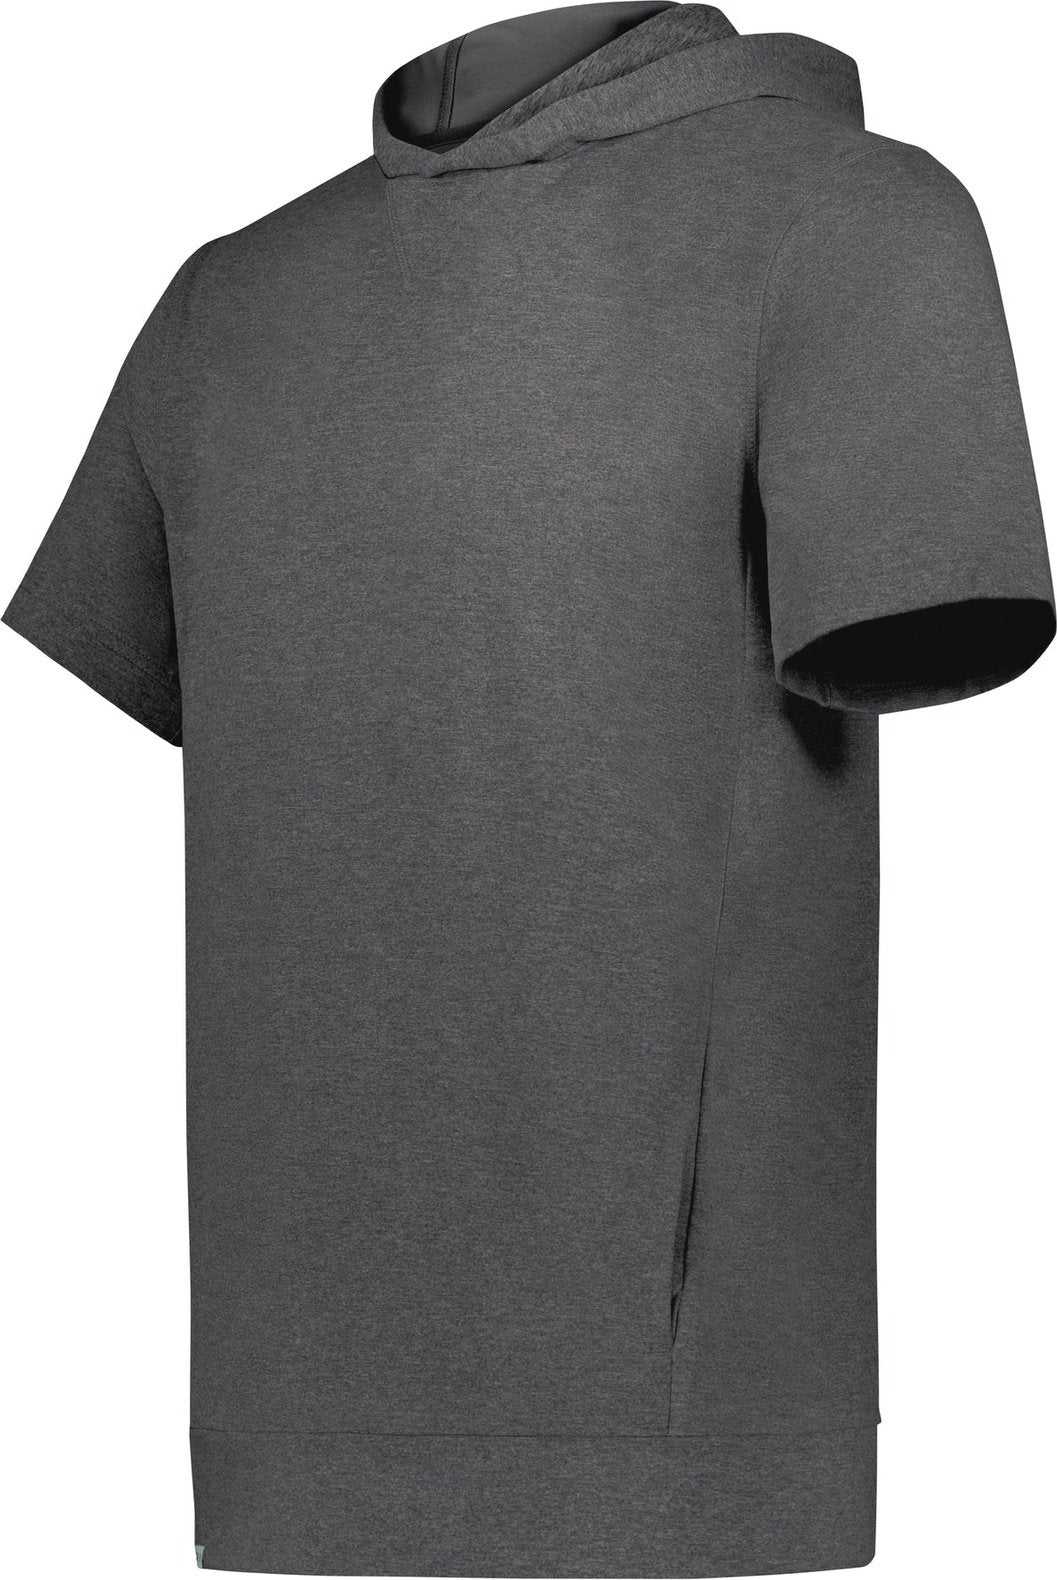 Holloway 222605 Youth Ventura Soft Knit Short Sleeve Hoodie - Carbon Heather - HIT a Double